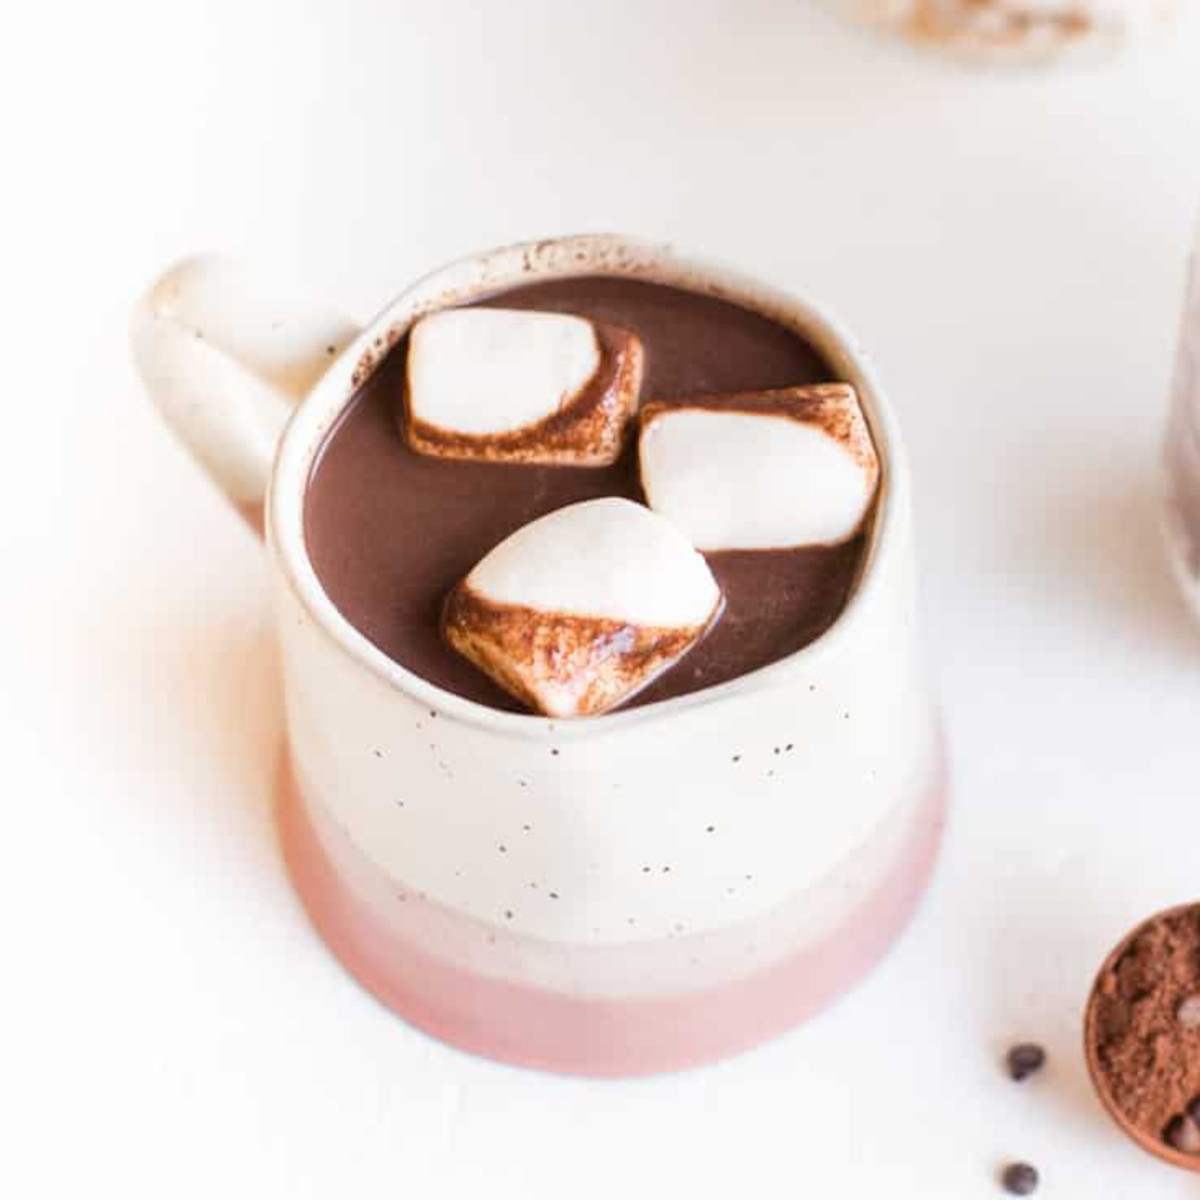 A mug of dairy-free hot chocolate, topped with vegan marshmallows.